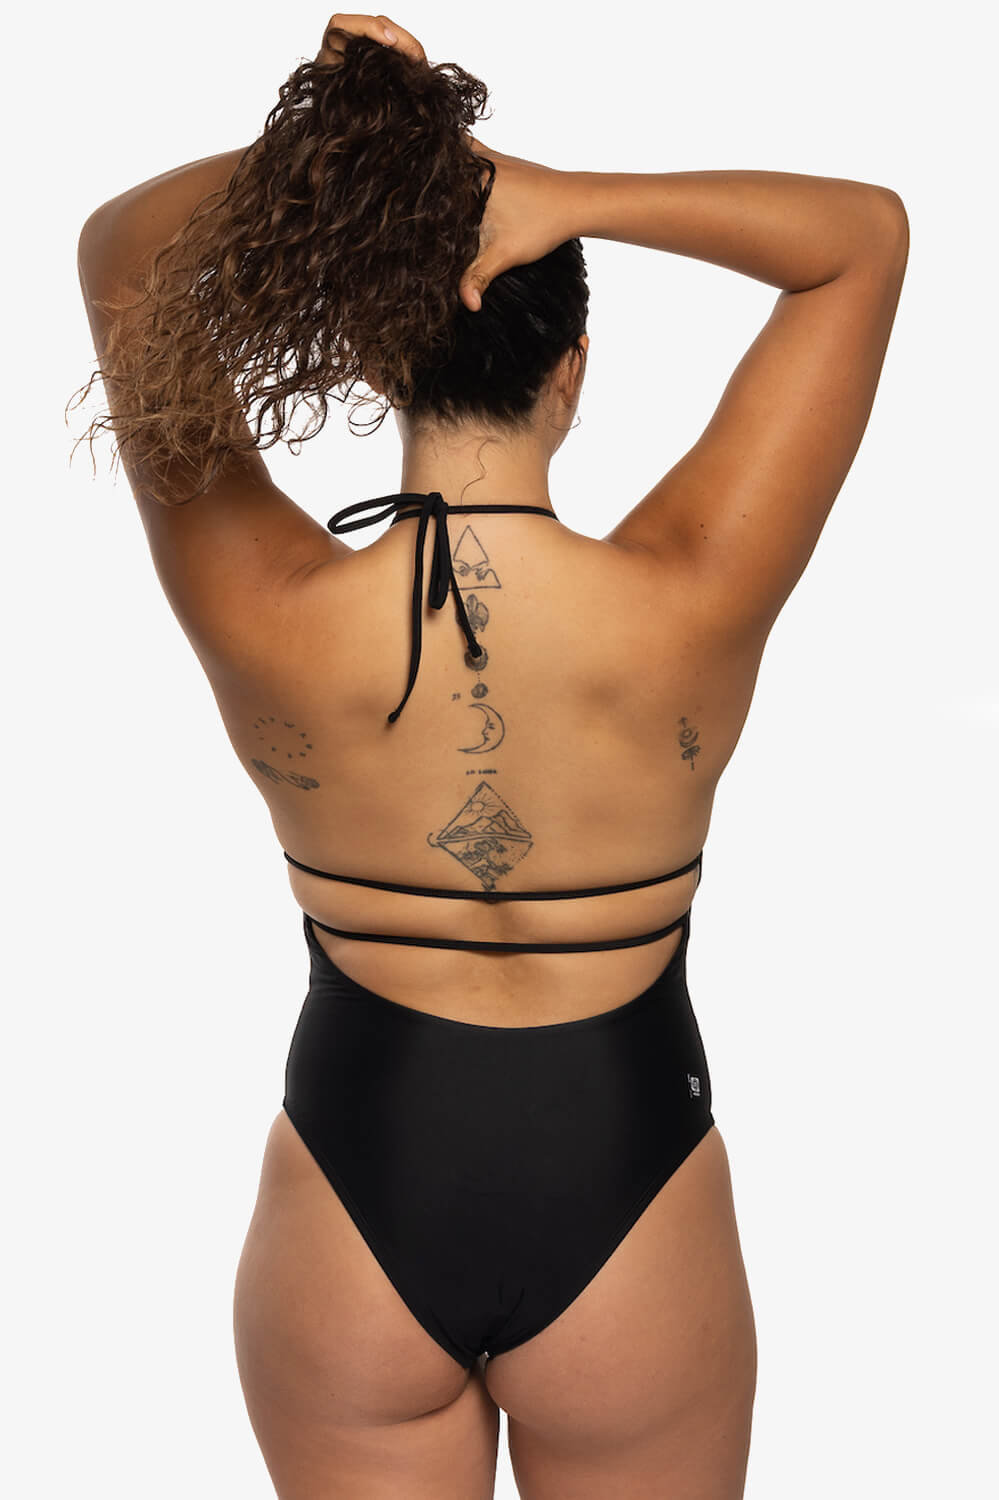 Want to buy a monokini?  Exclusive Monokinis online - Magic Hands Boutique